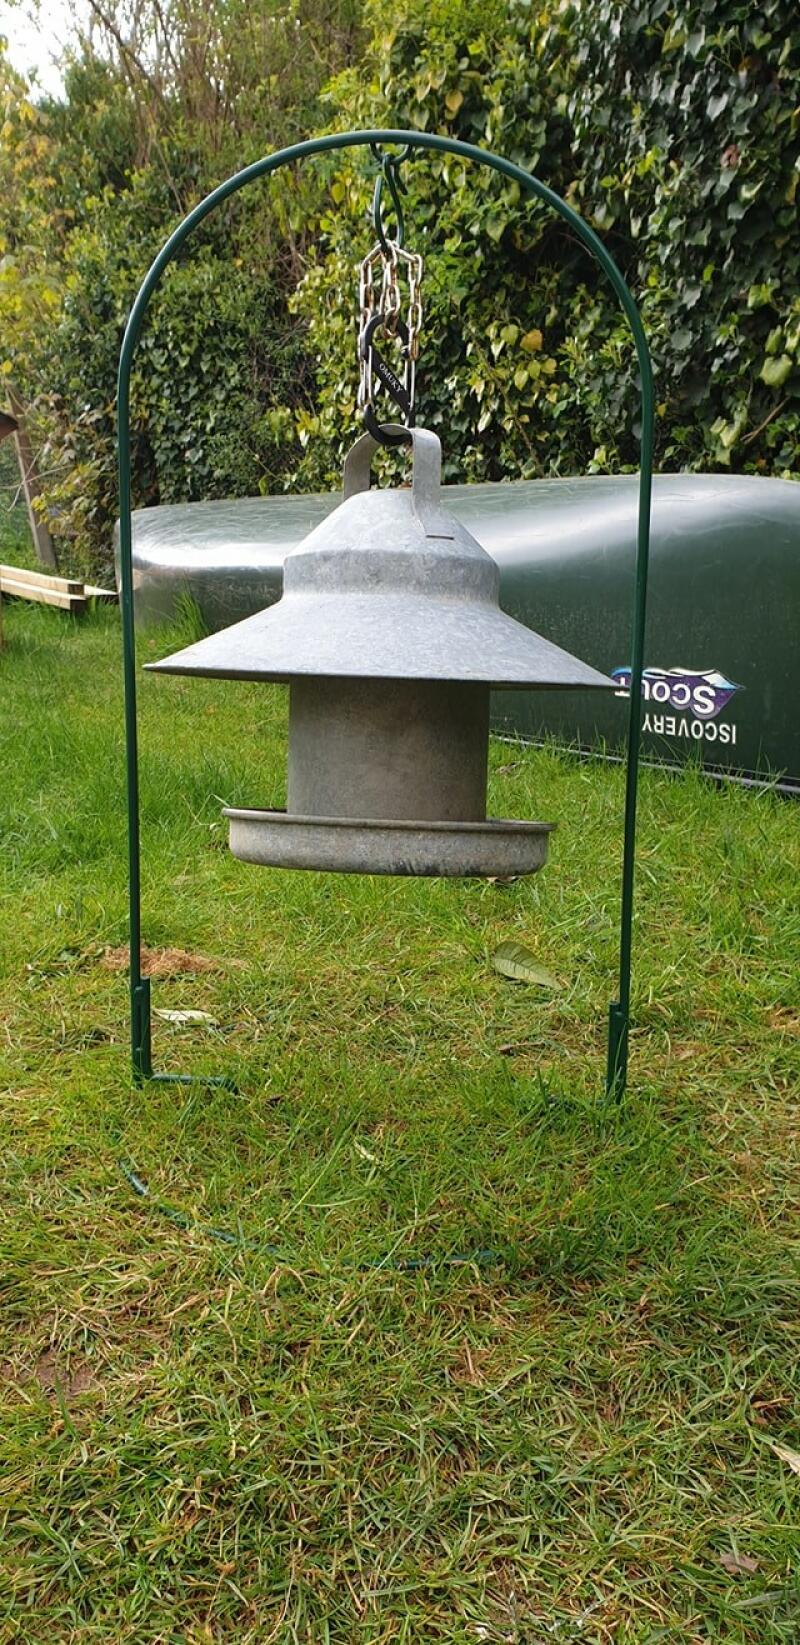 A feeder attached to a hoop